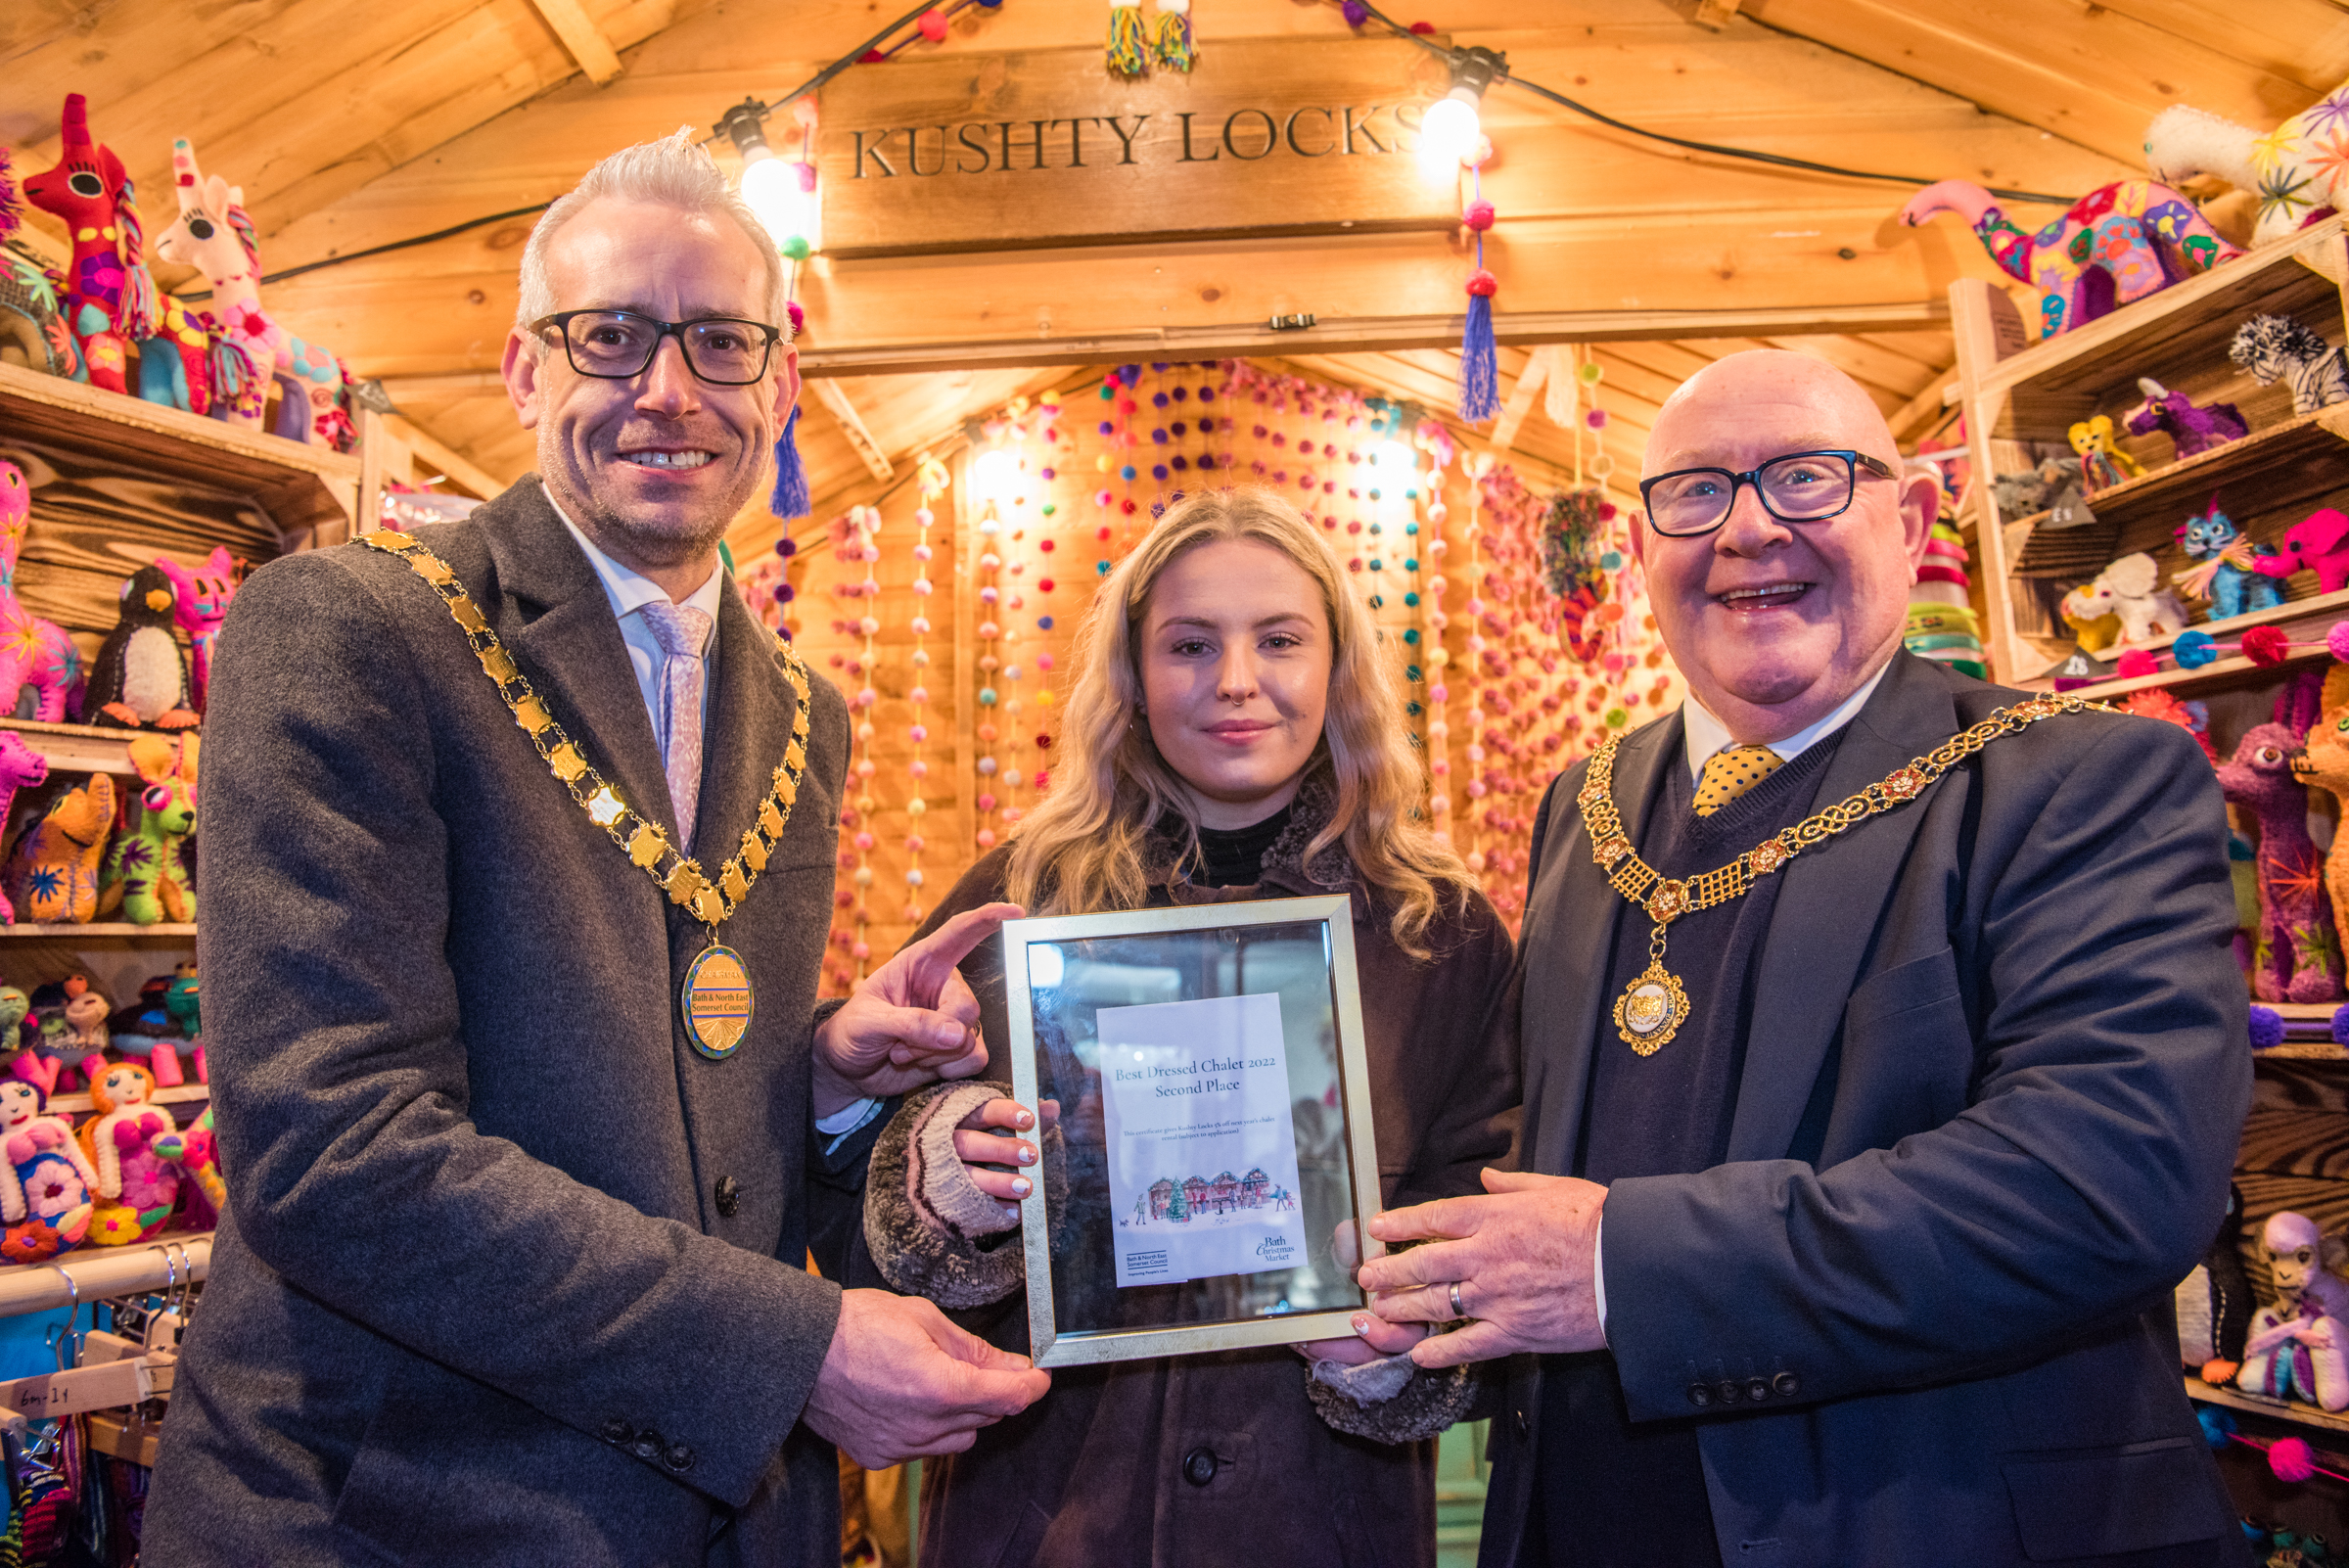 From left to right: council Chair, Shaun Stephenson-McGall, Louise Watson from Kushty Locks and The Right Worshipful Mayor of Bath, Councillor Rob Appleyard inside the Kushty Locks chalet.